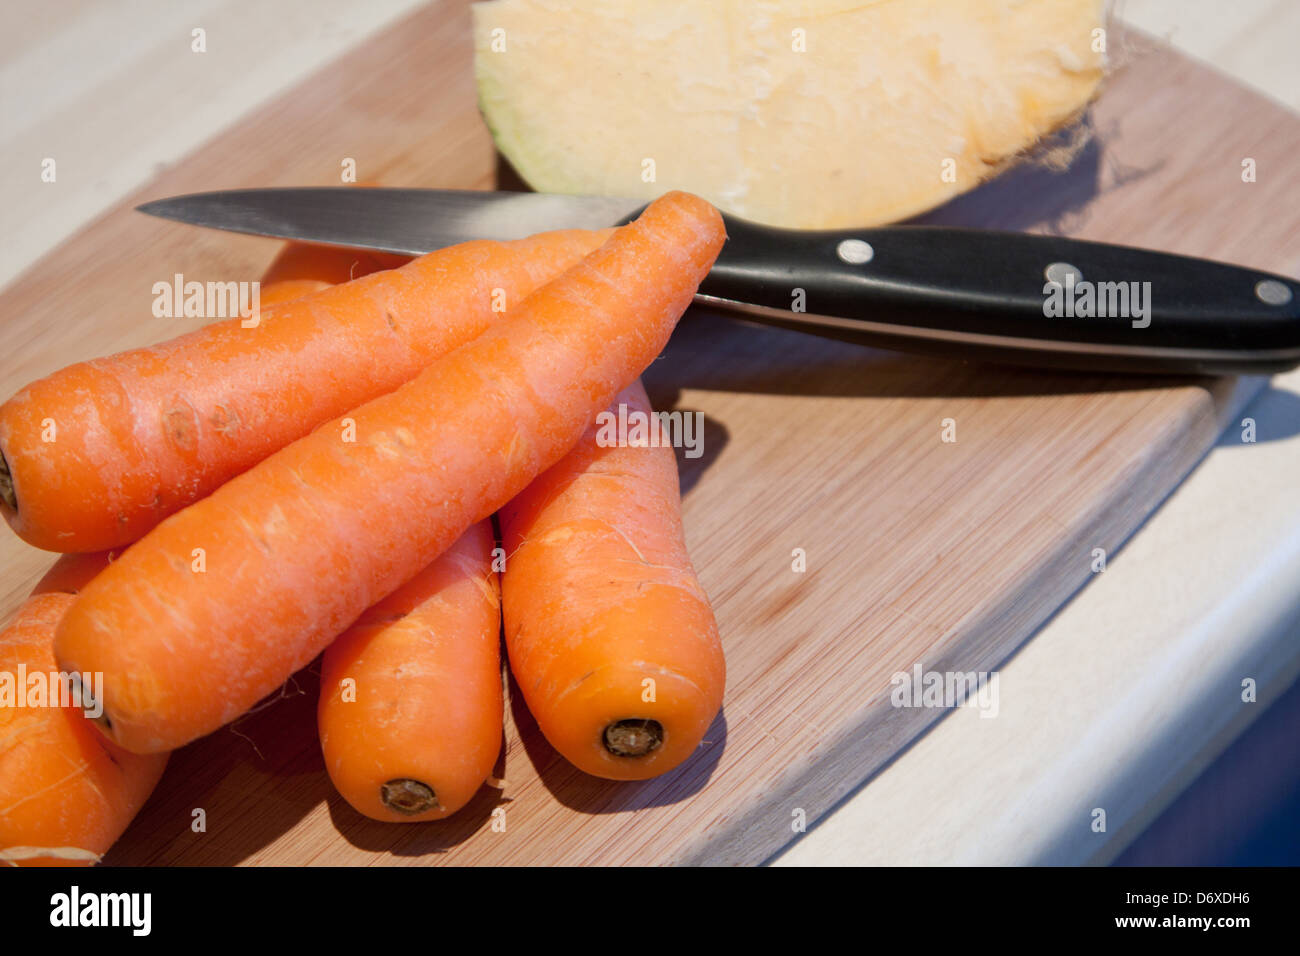 Carrot, swede and knife Stock Photo